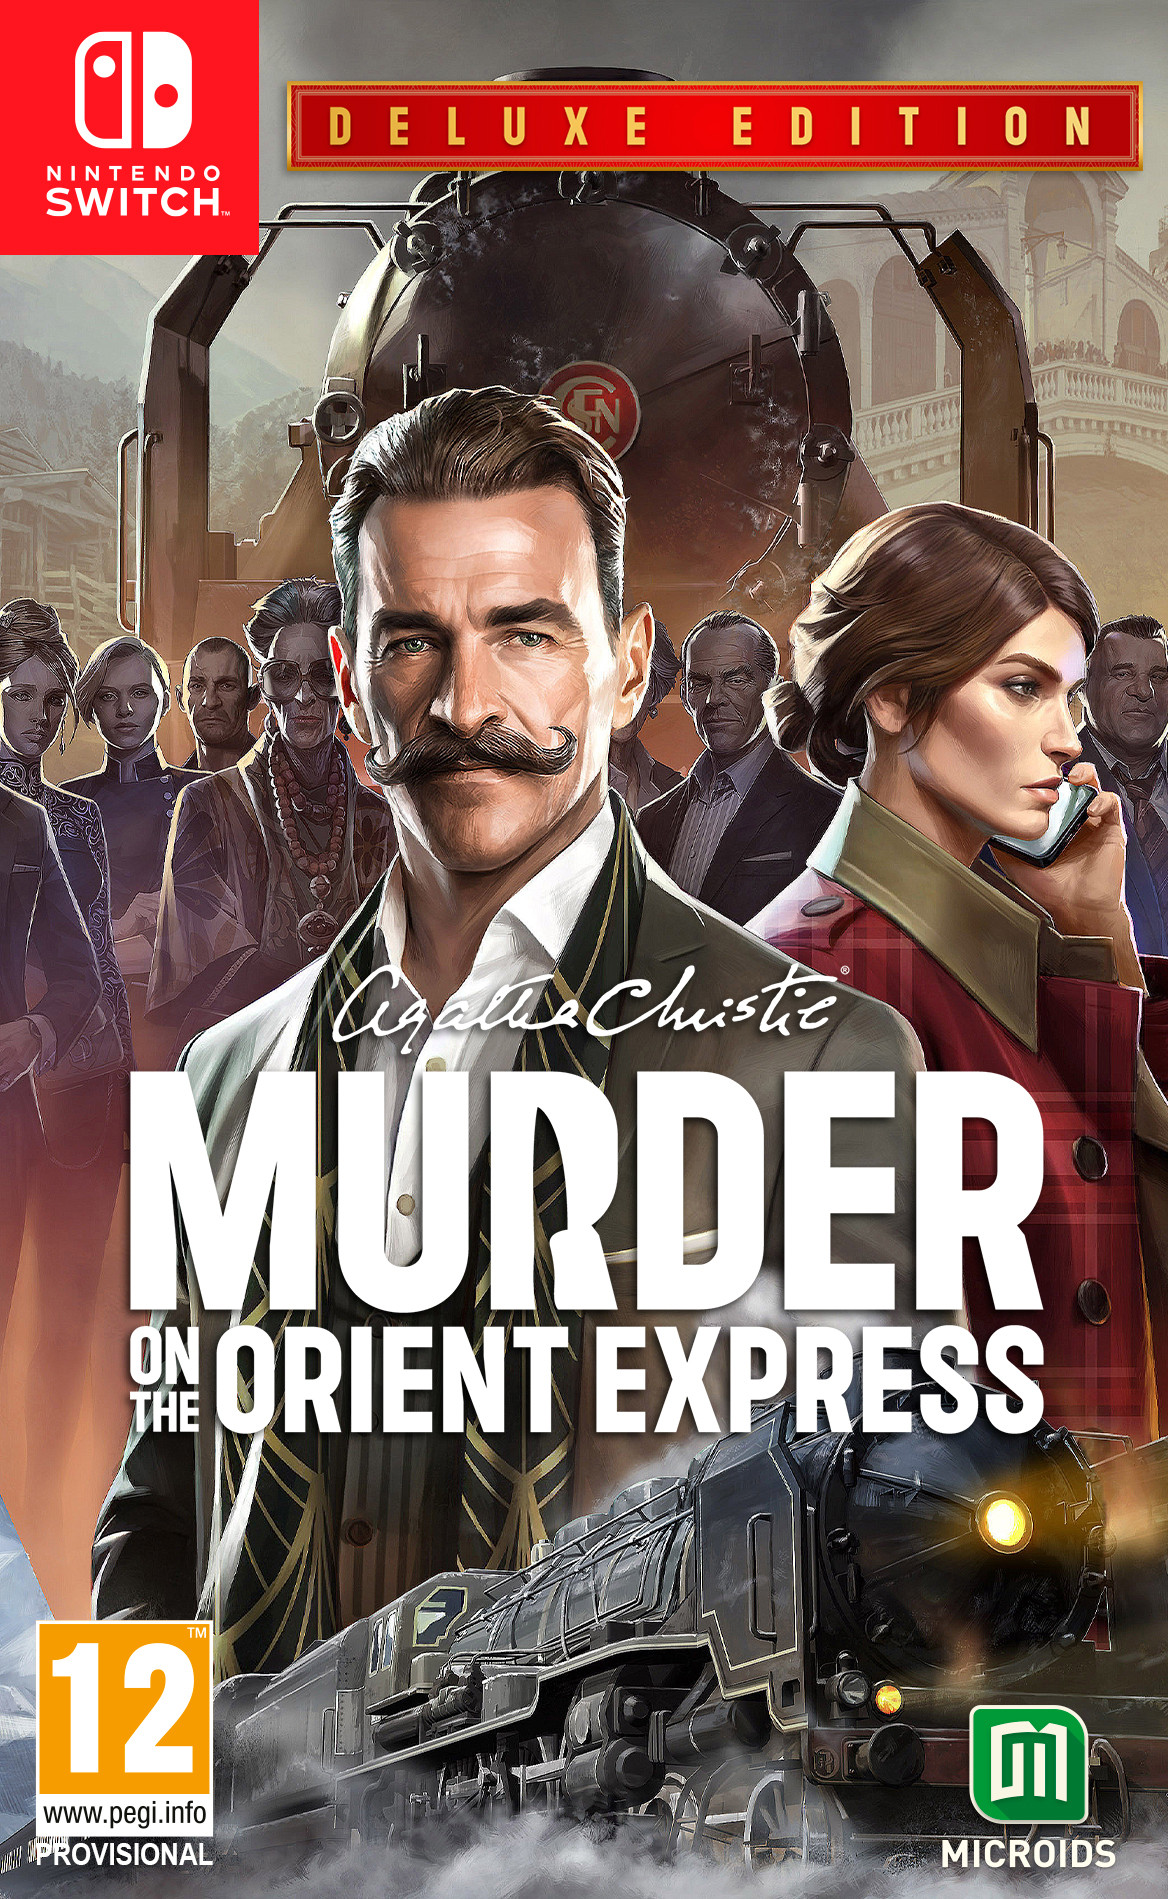 Agatha Christie Murder on the Orient Express Deluxe Edition - Nintendo Switch